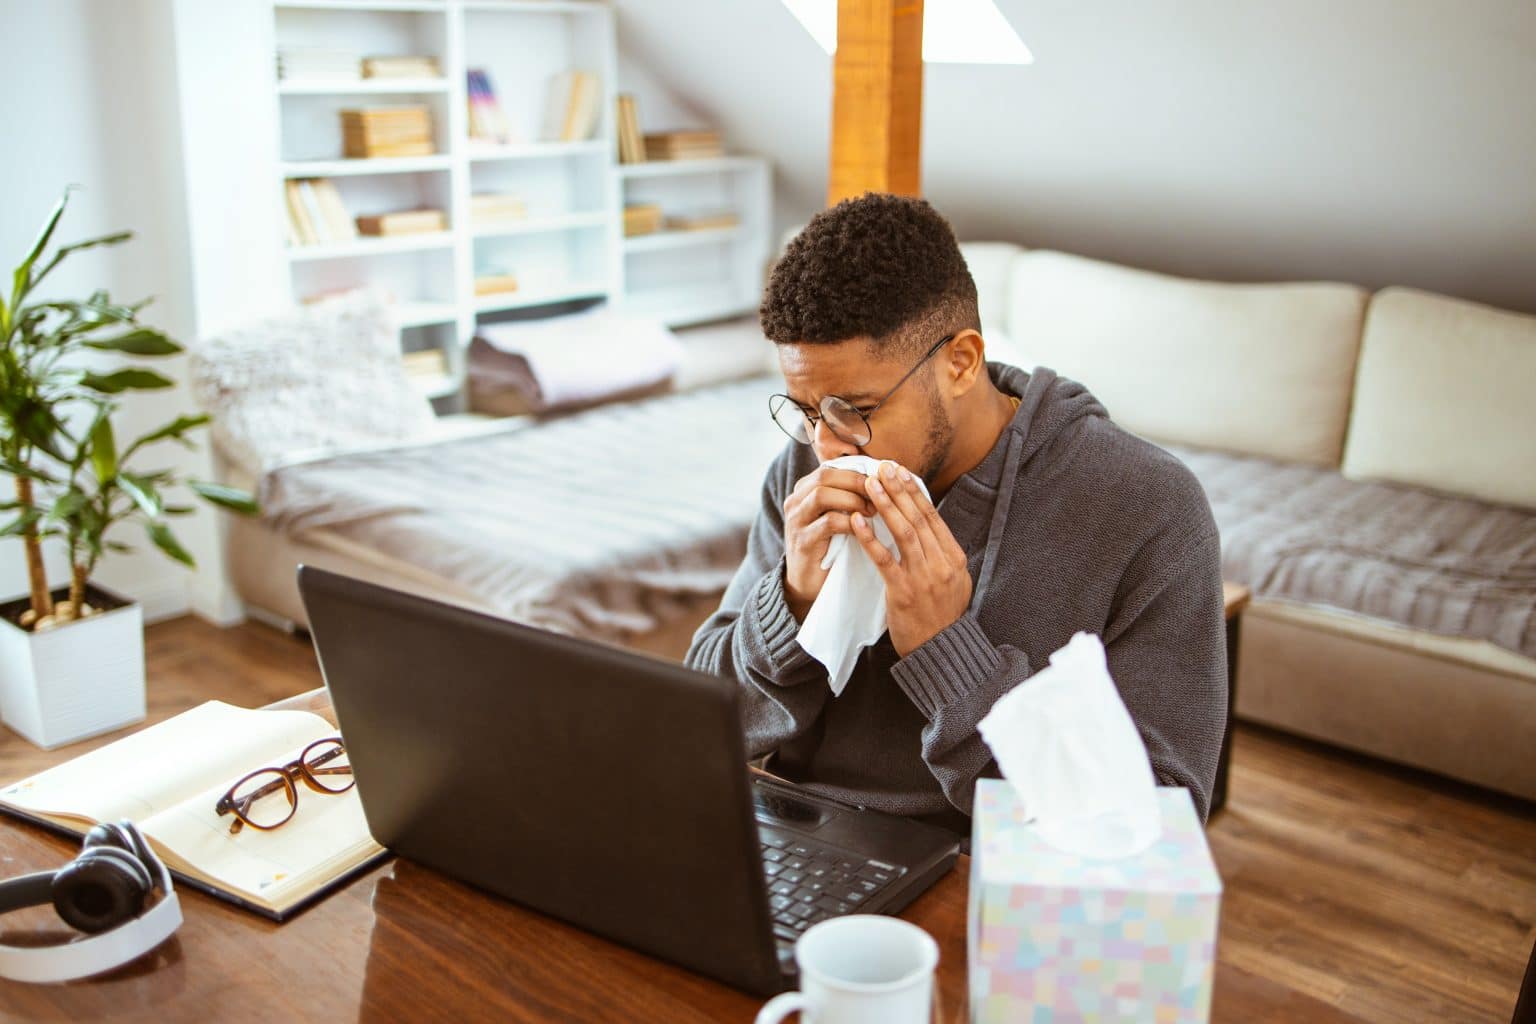 African-American man works at home blows his nose due to nasal obstruction.